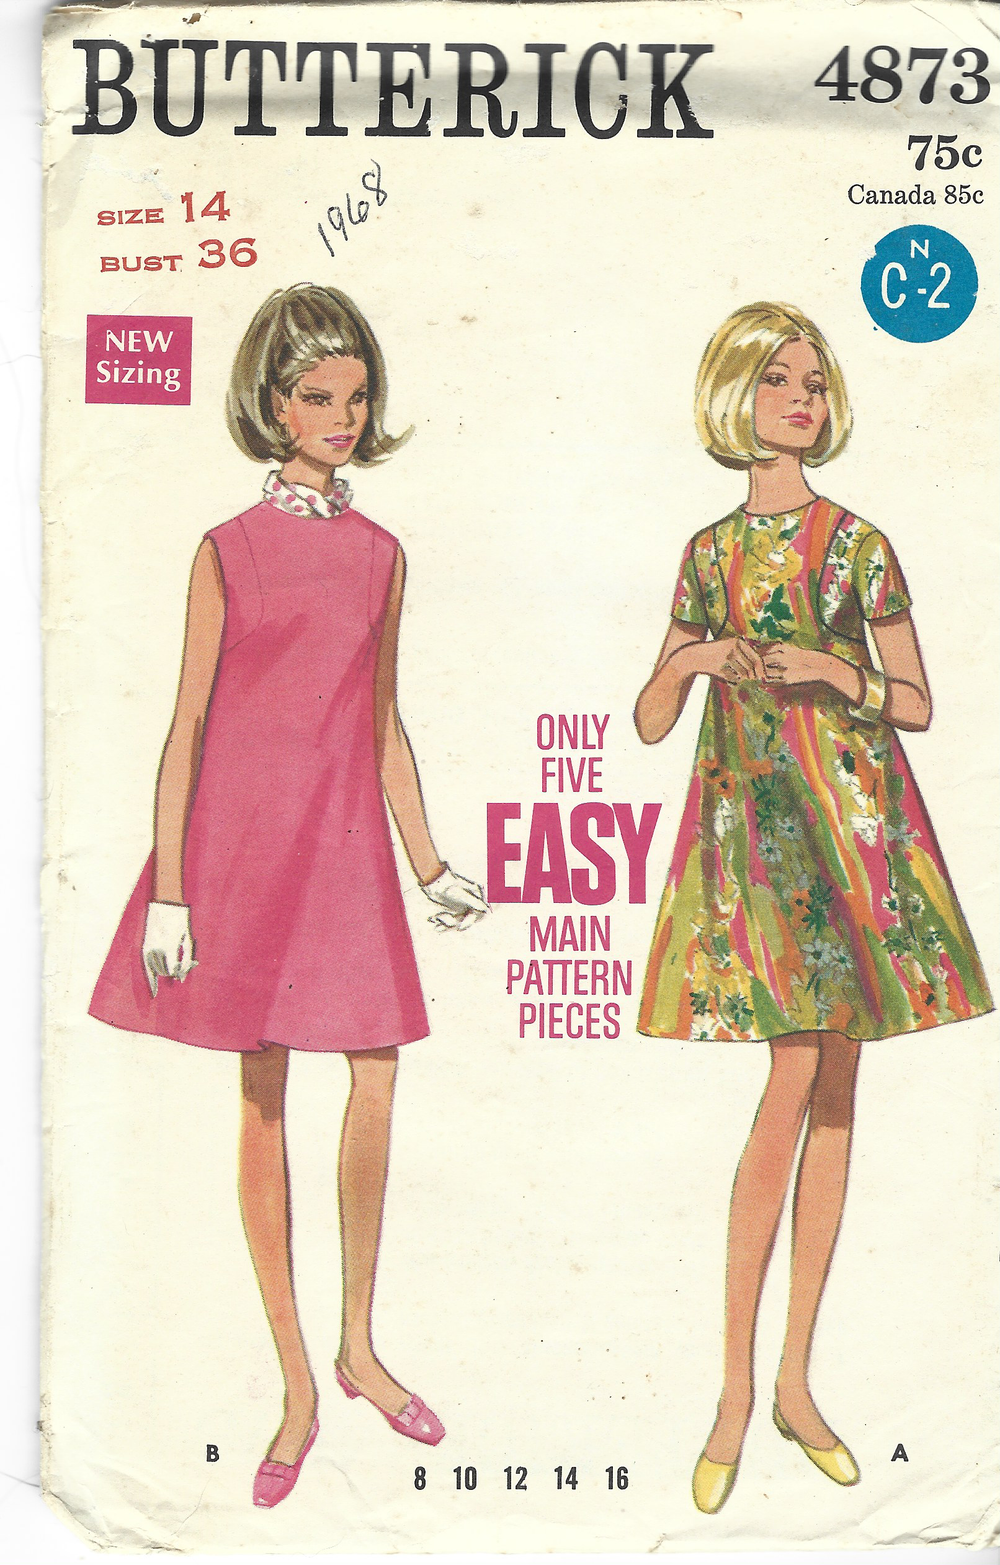 Butterick 4873 Ladies Tent Dress Vintage Sewing Pattern 1960s